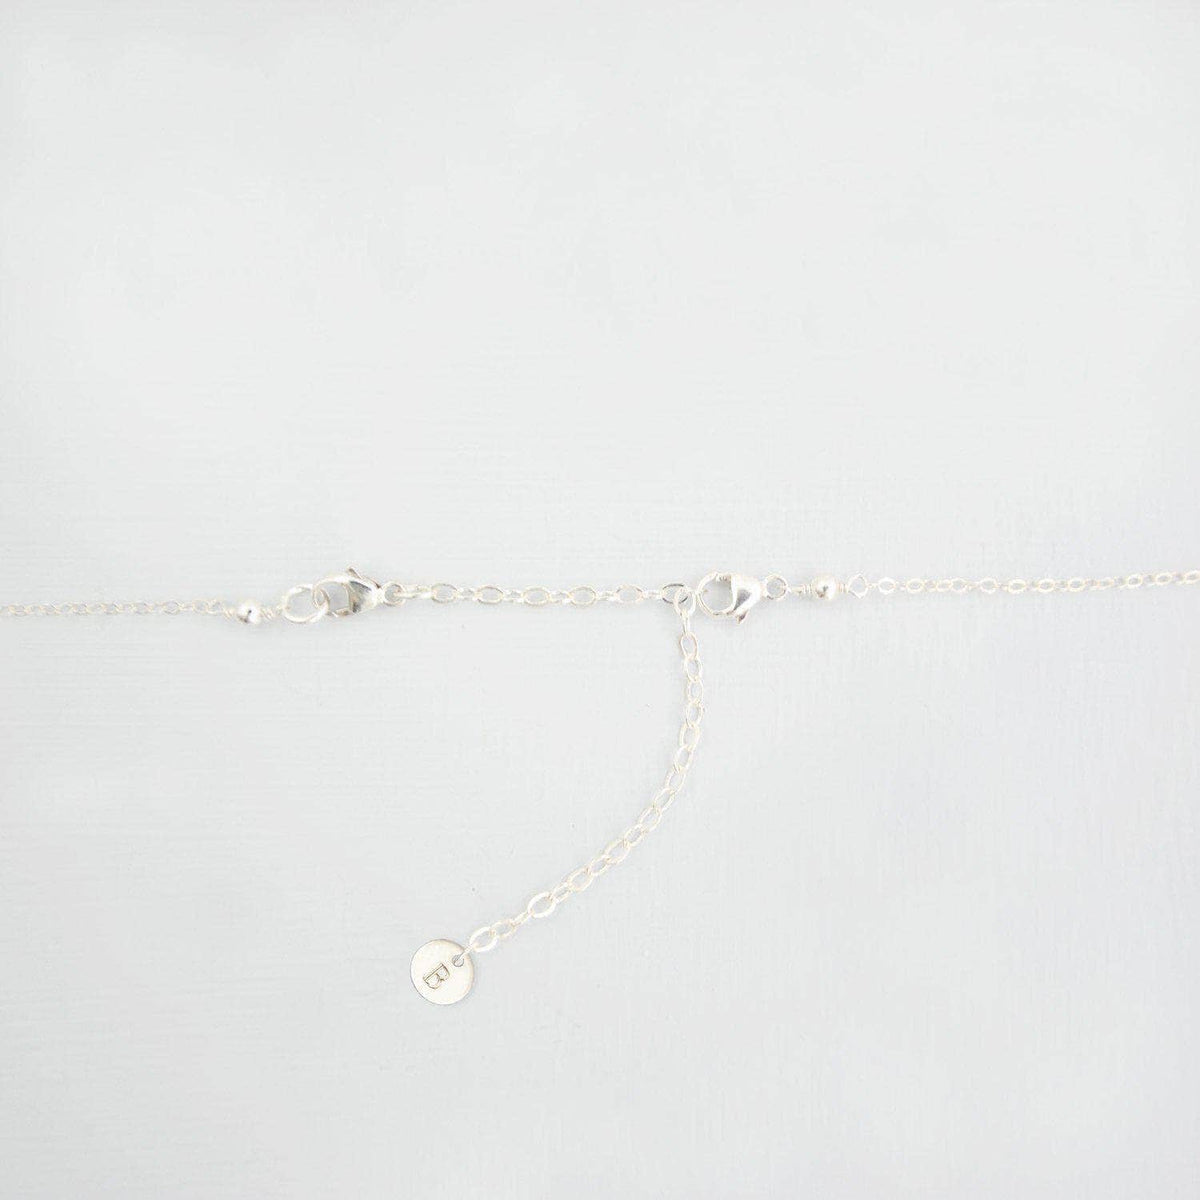 Wedding Necklace Adjustable Extender (Removable Or Fixed)